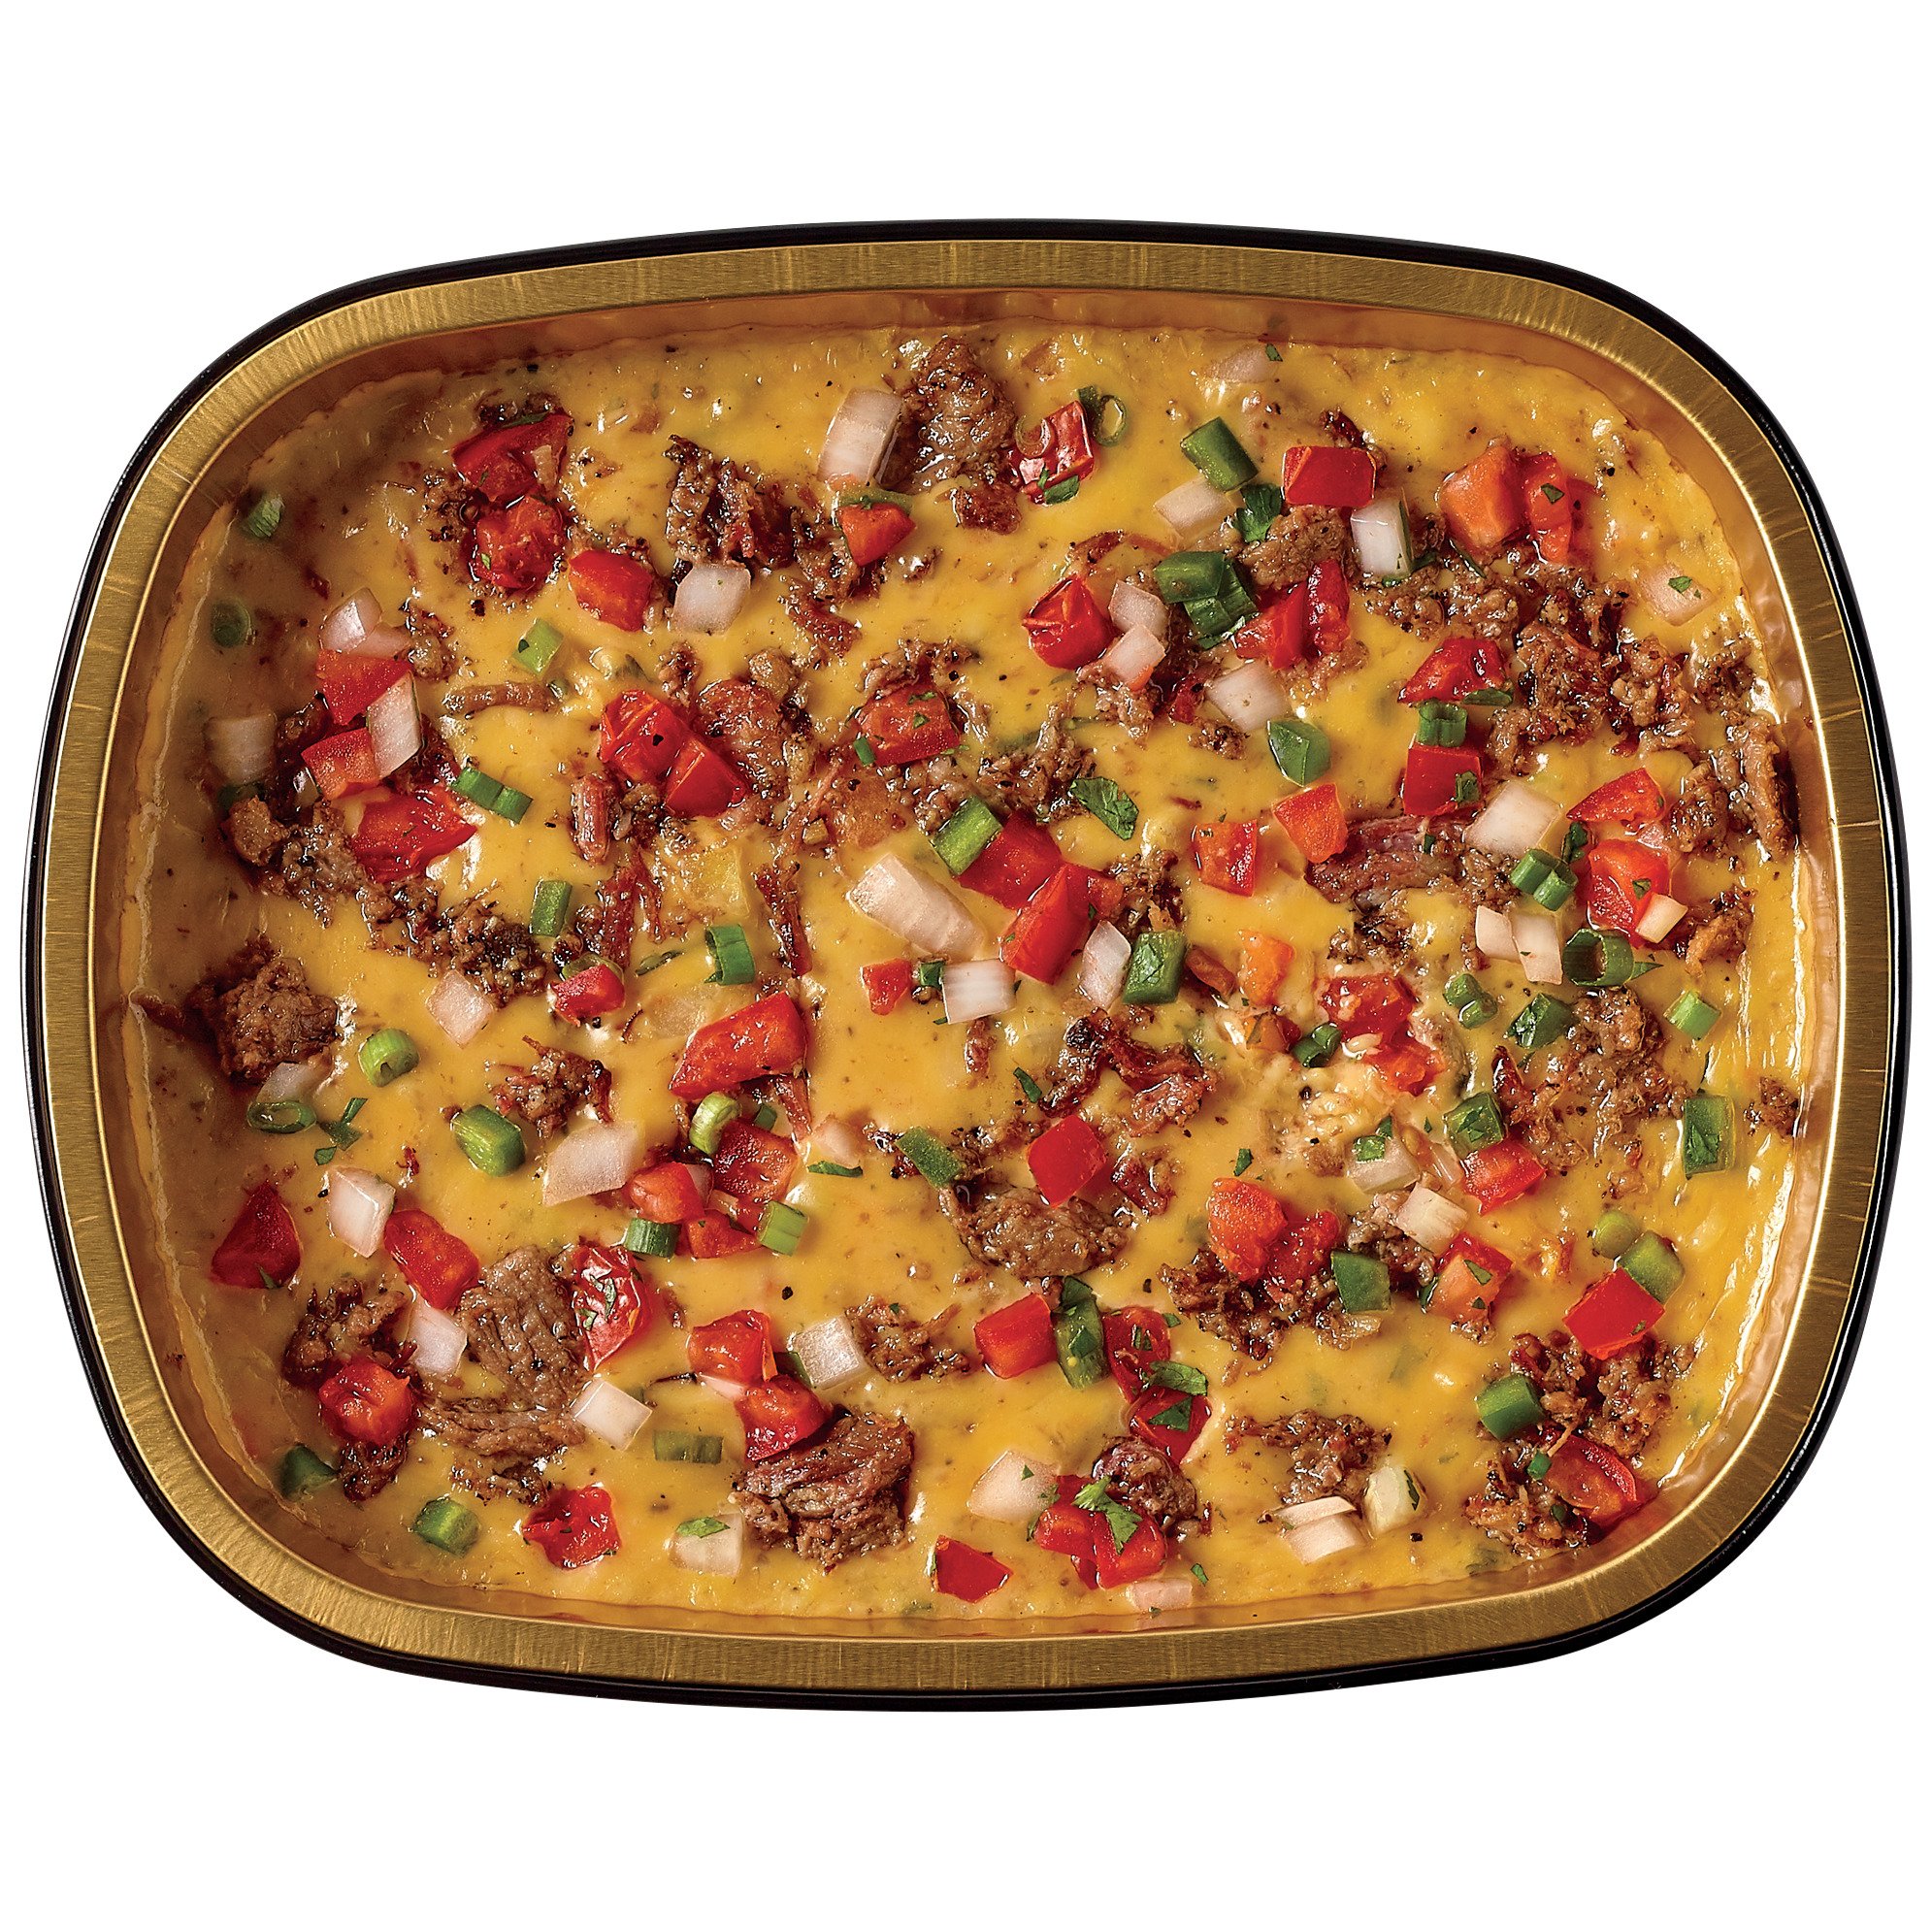 Camping Out Casserole Recipe from H-E-B